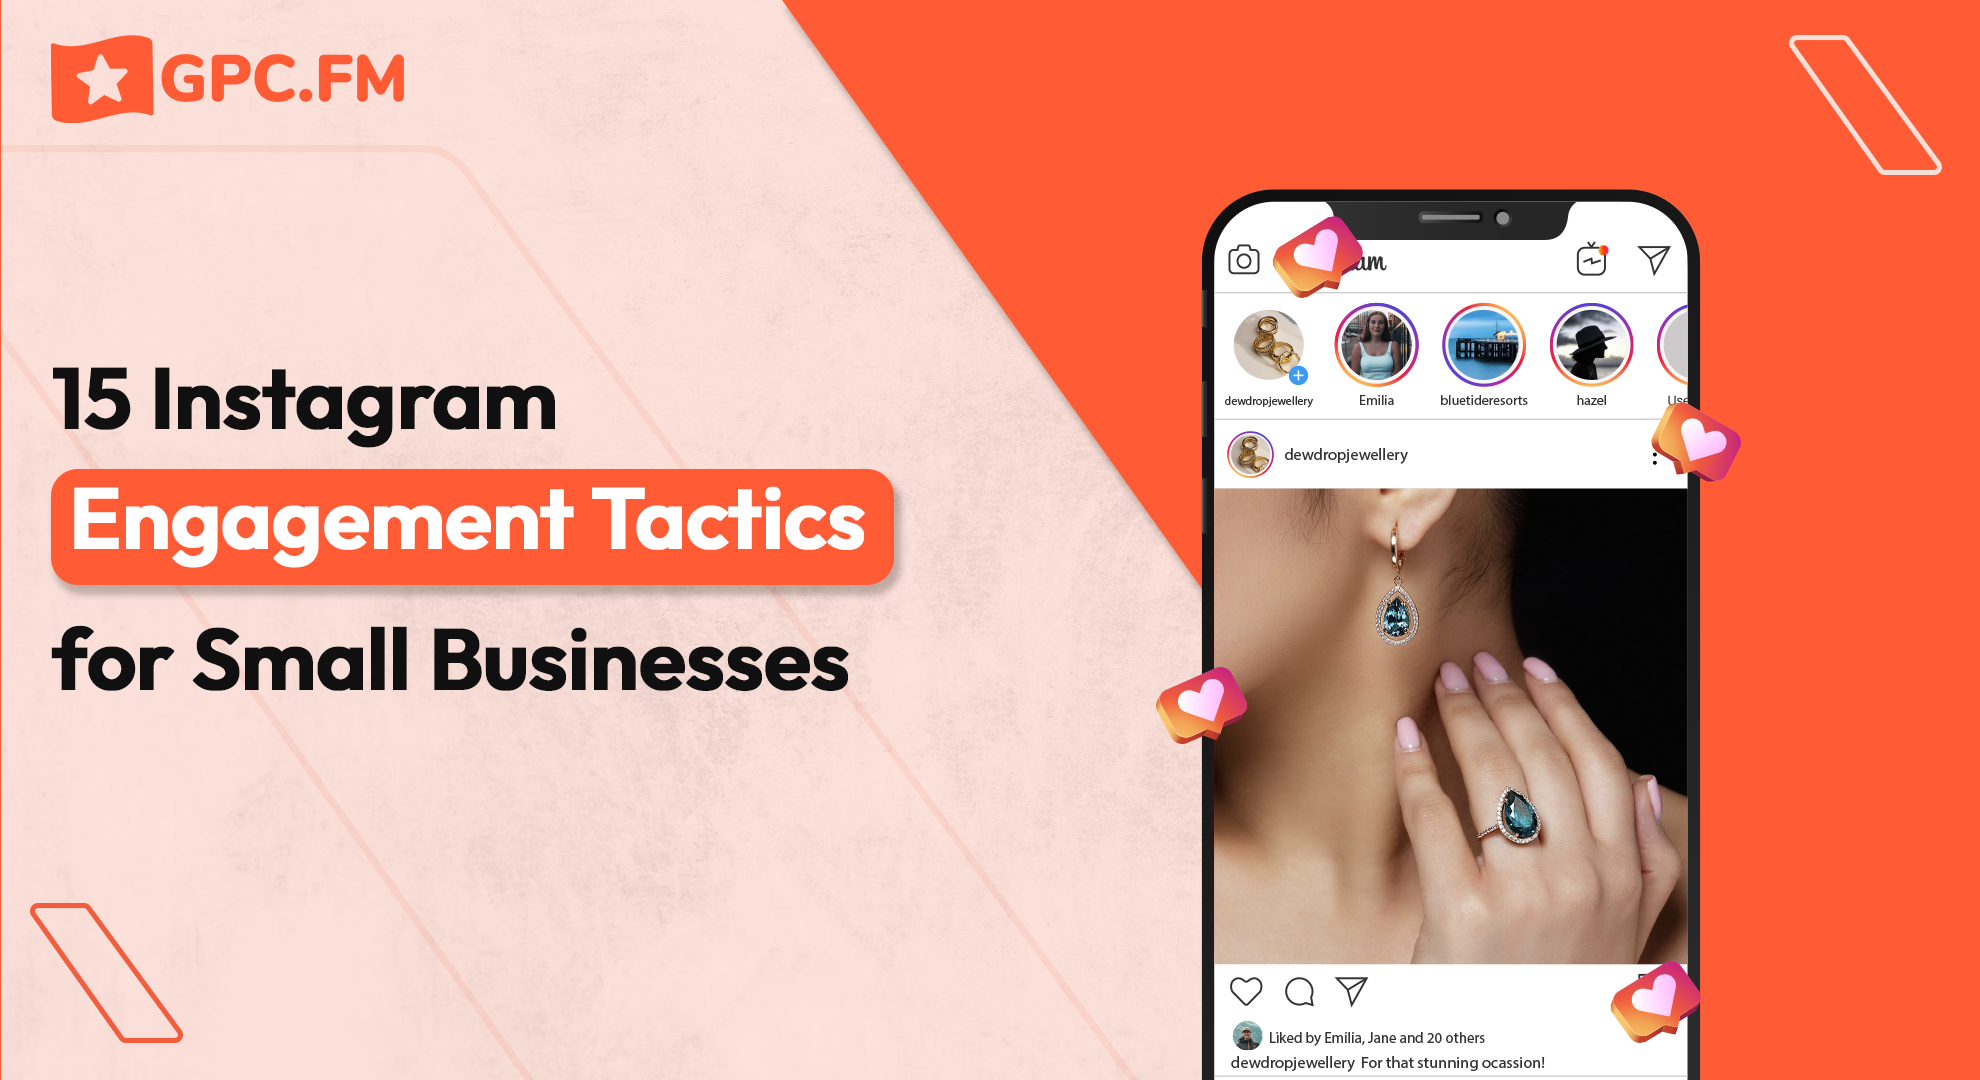 15 Instagram Engagement Tactics for Small Businesses